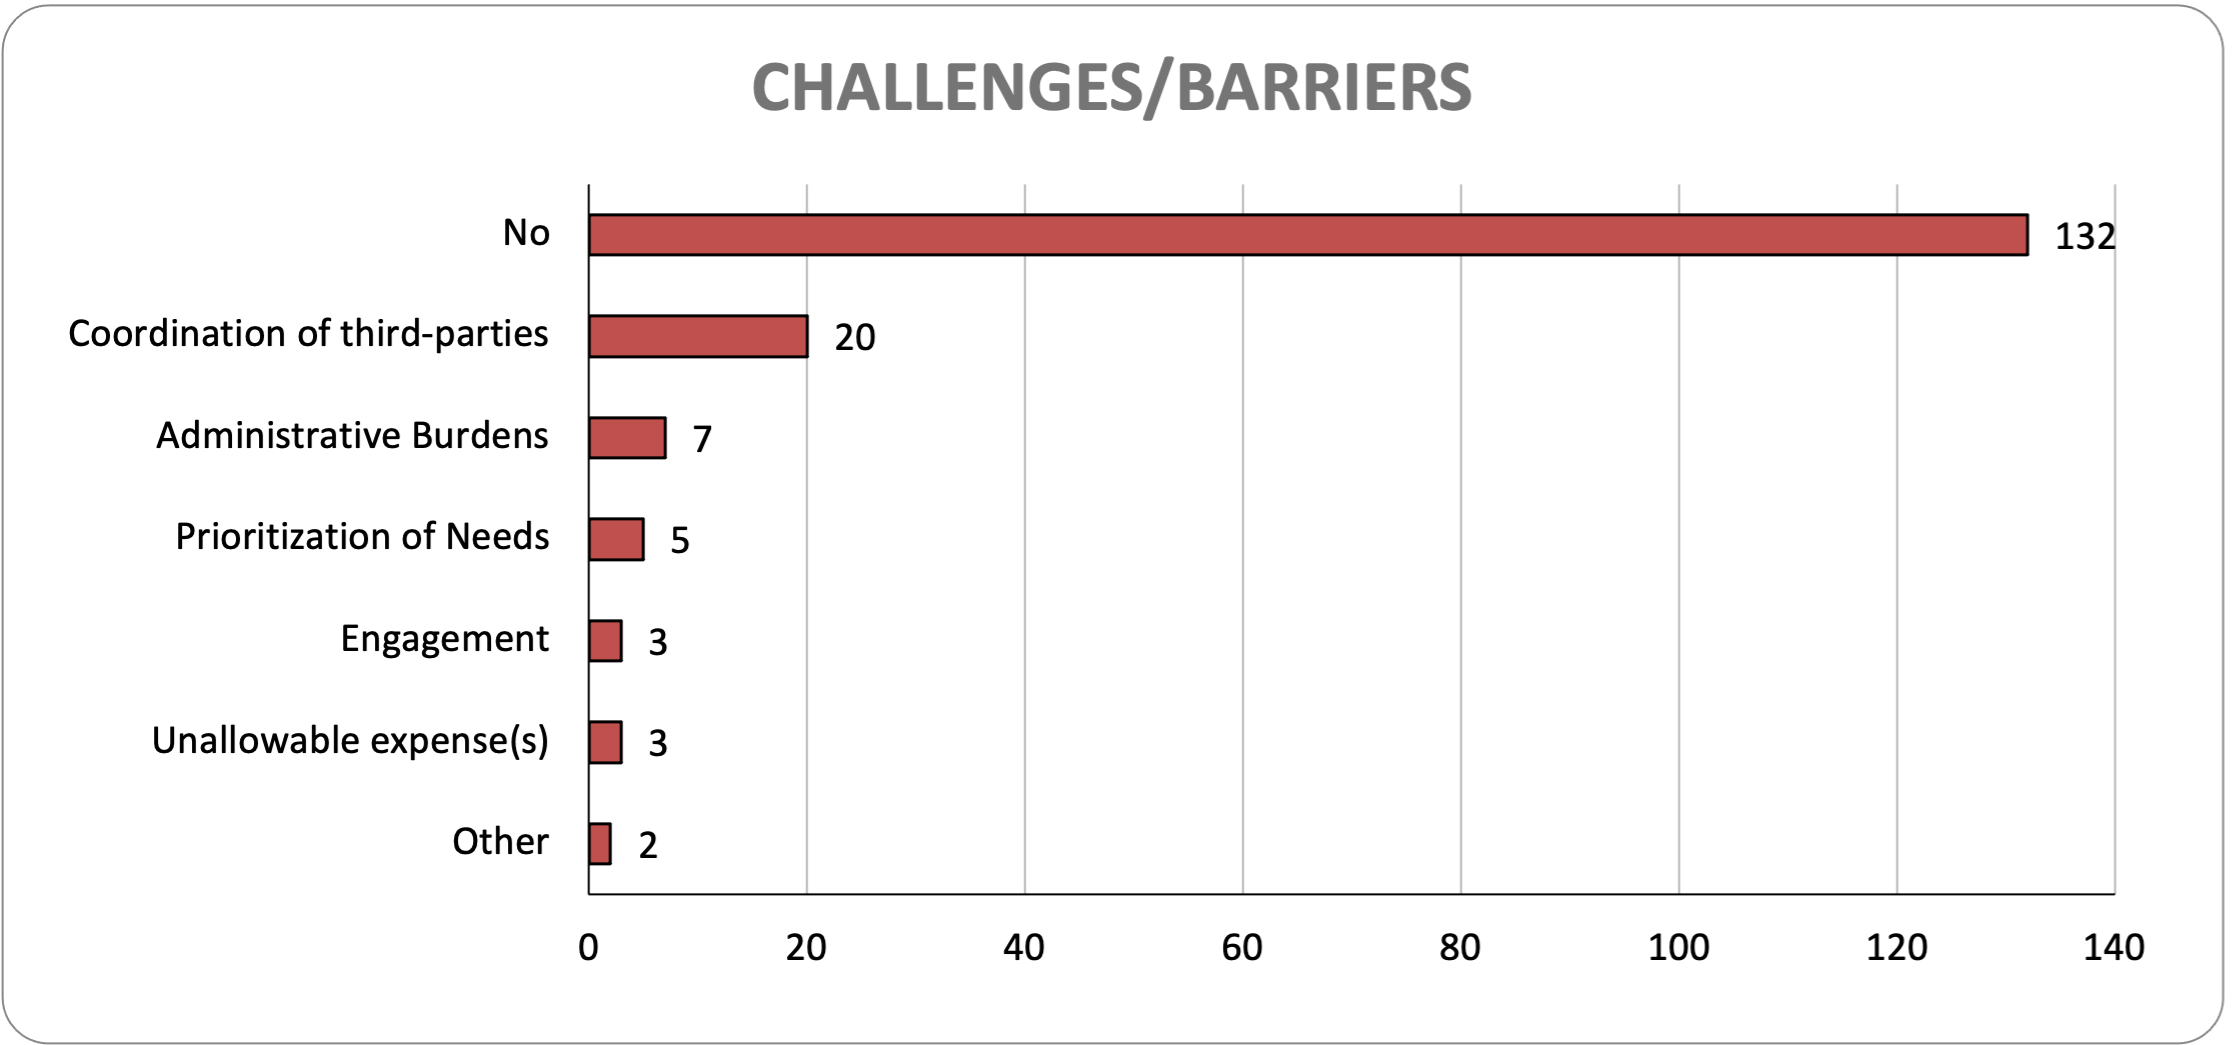 bar chart depicting most significant barriers and challenges faced by providers